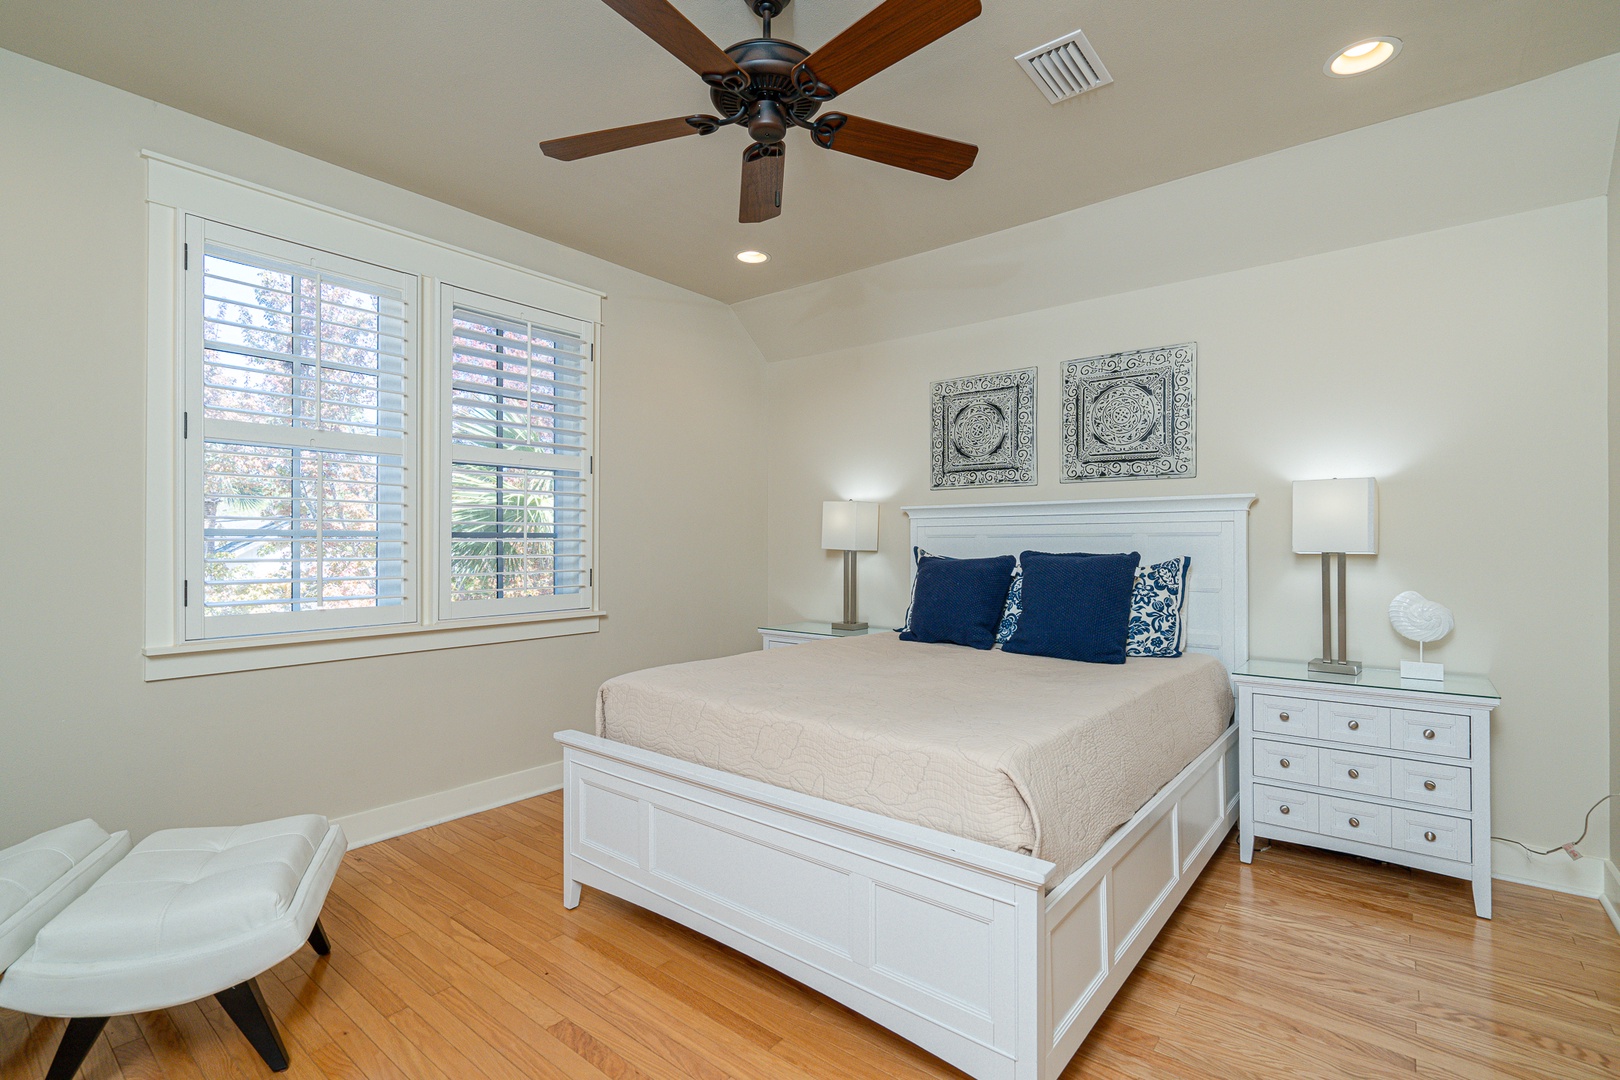 This 2nd-floor bedroom features a plush queen bed & private ensuite